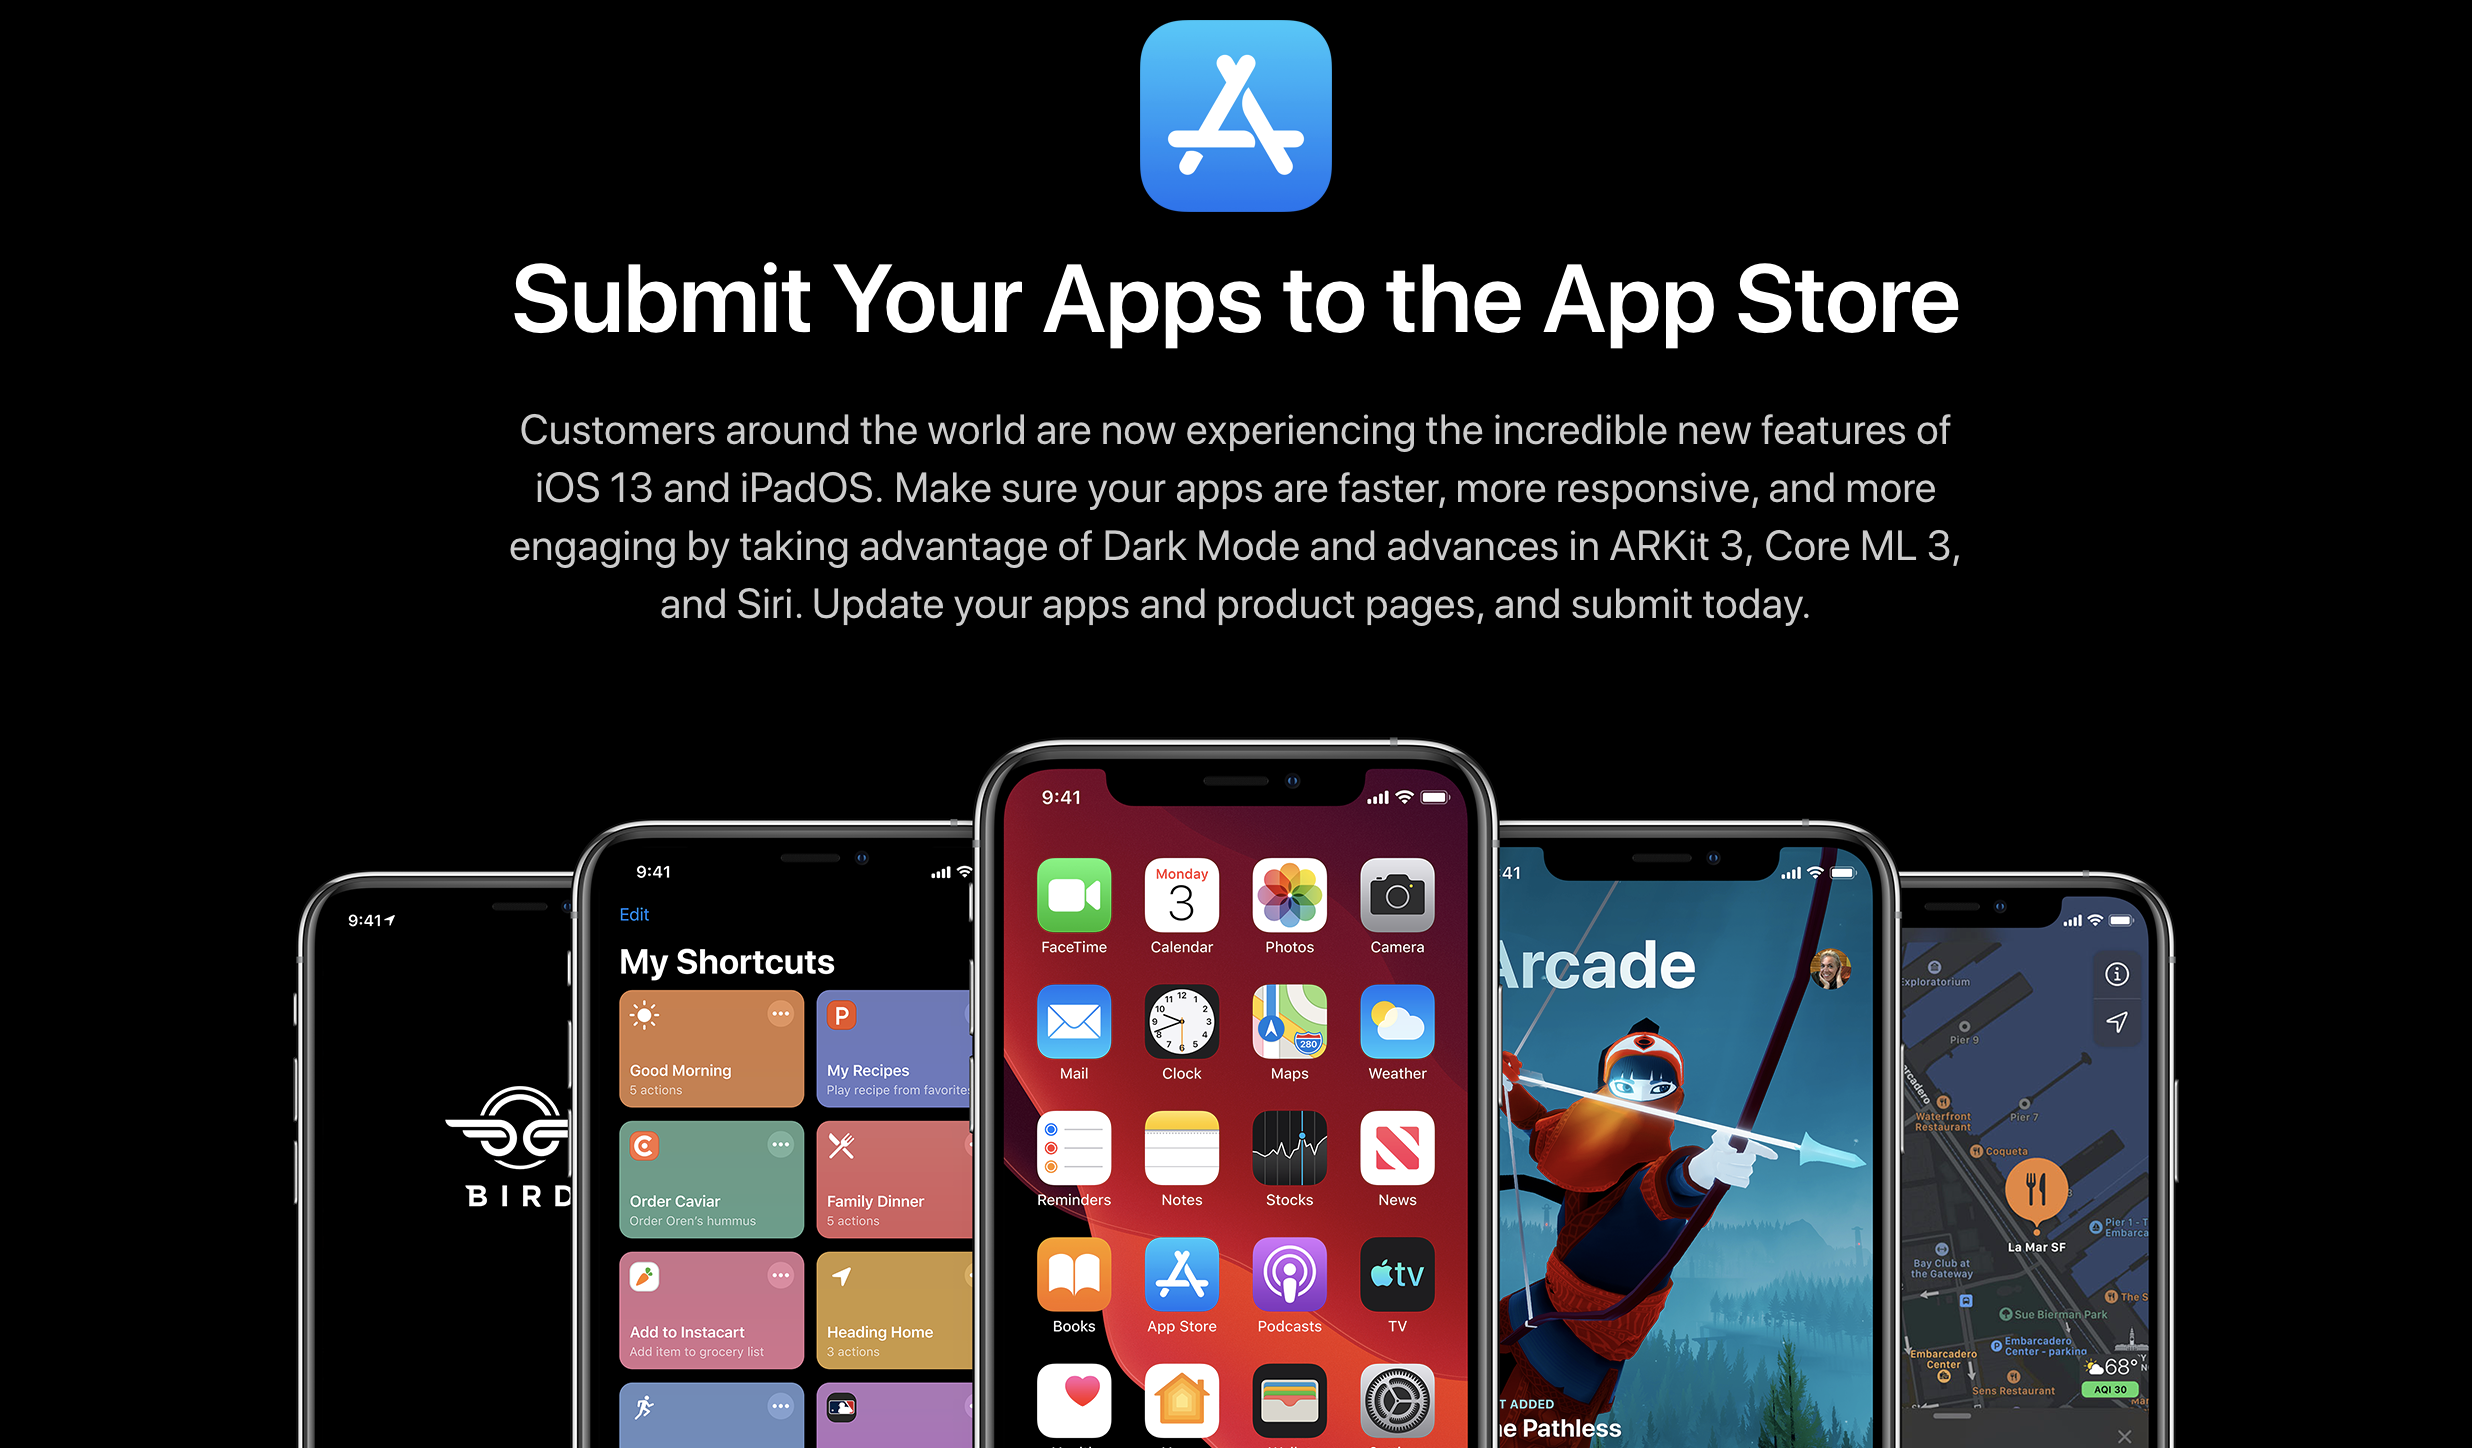 Developers must build apps using the iOS 13 SDK . If not, won't be accepted